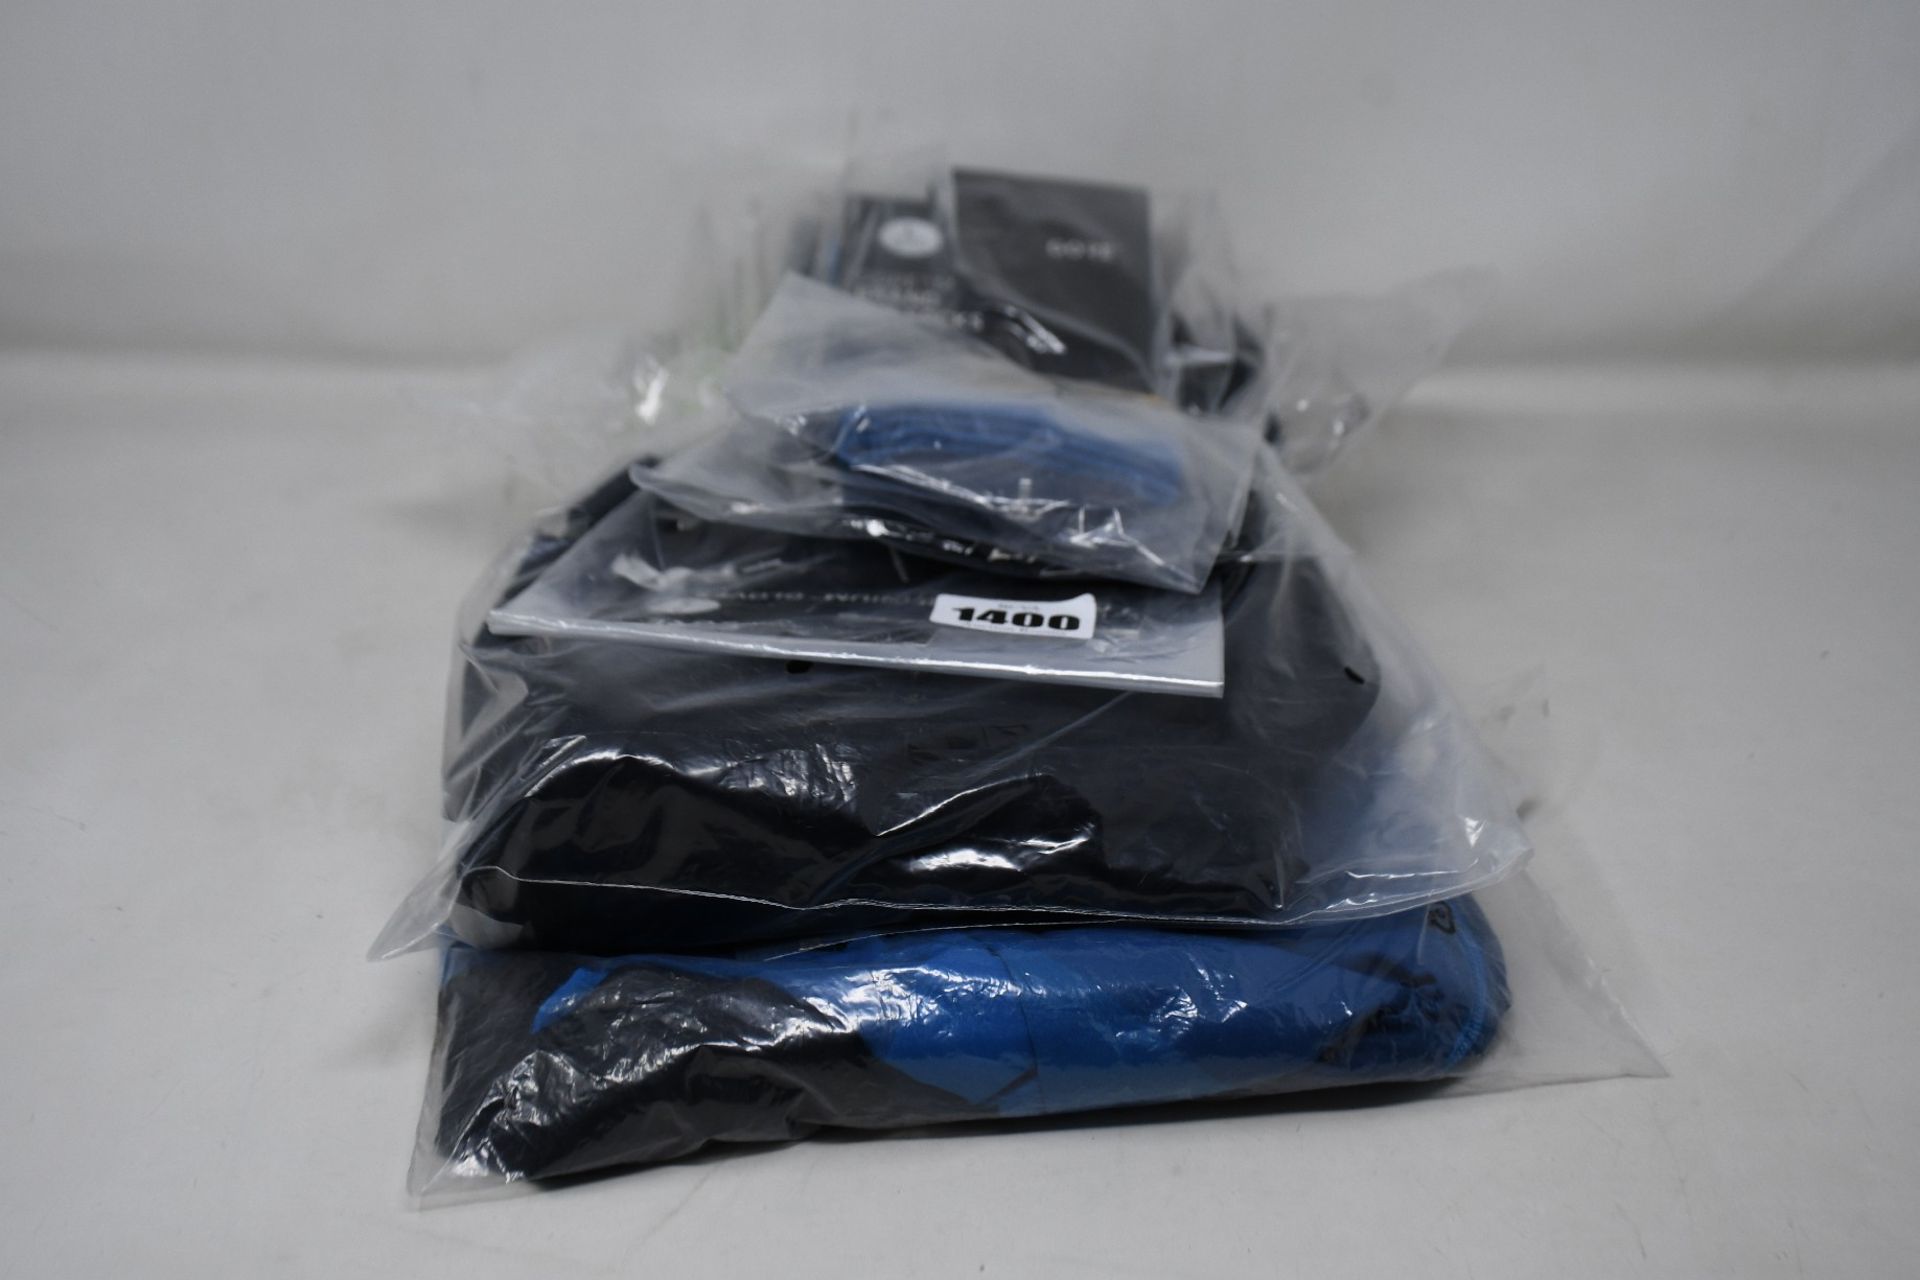 As new Gore cycling clothing/accessories; a Fade jersey (M), C5 jersey (L), C3 short tights (S),